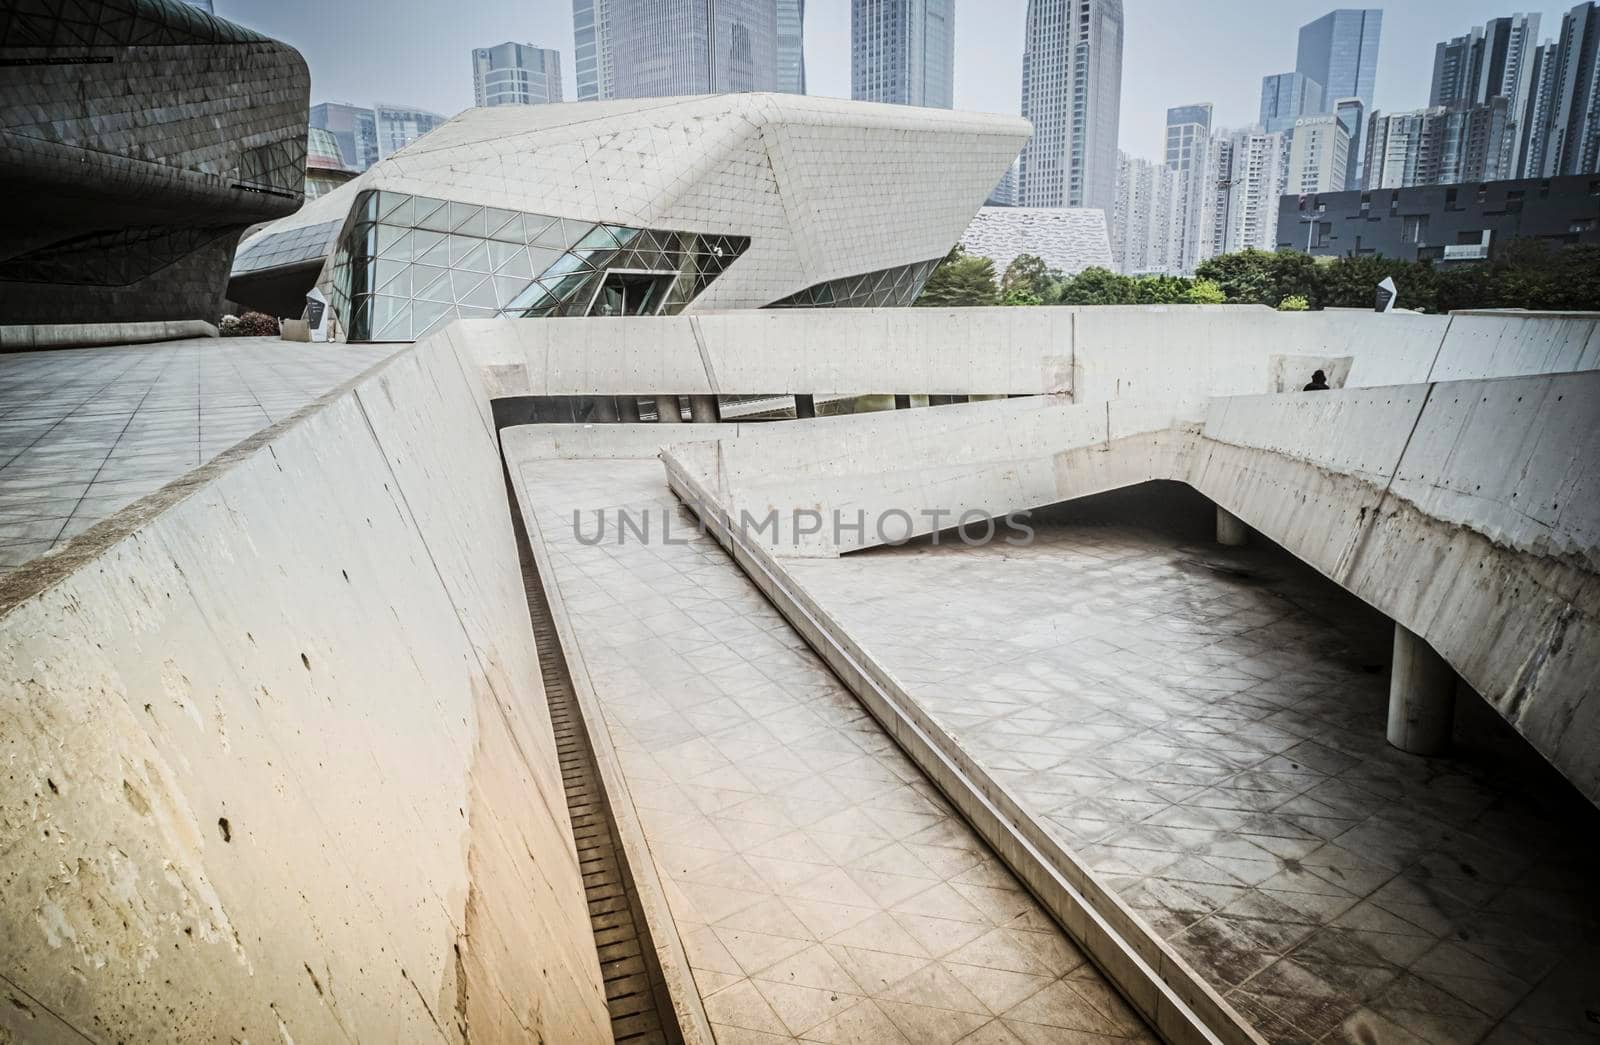 Guangzhou Opera House is a Chinese opera house in Guangzhou,in the new city of Pearl River, the Guangzhou Opera House has become one of China's three biggest theaters